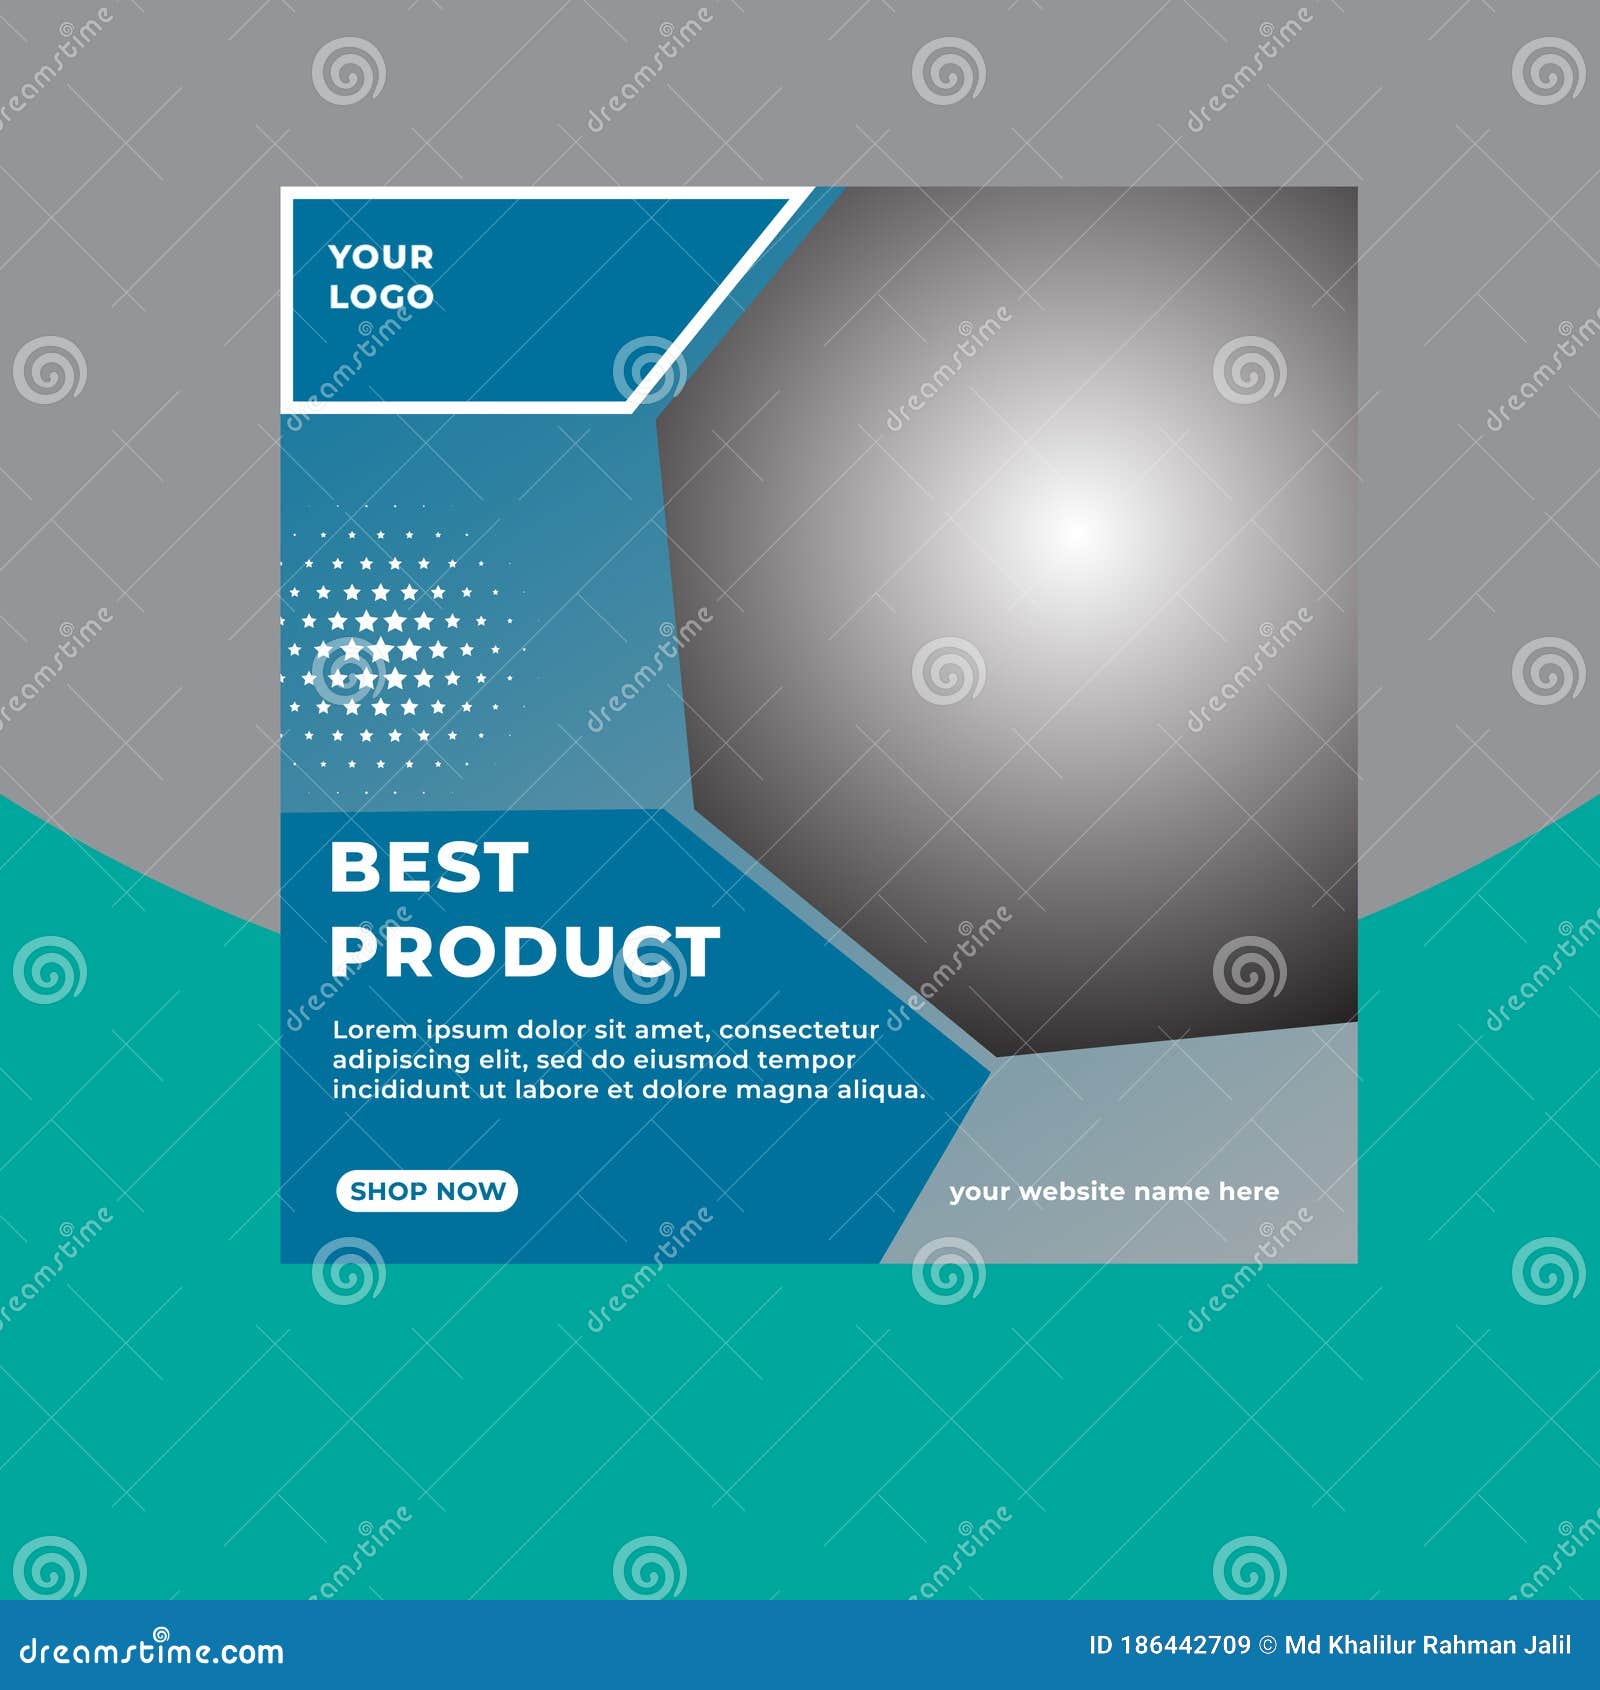 Best Product Sale Social Media Instagram Post Banner Template Intended For Product Banner Template